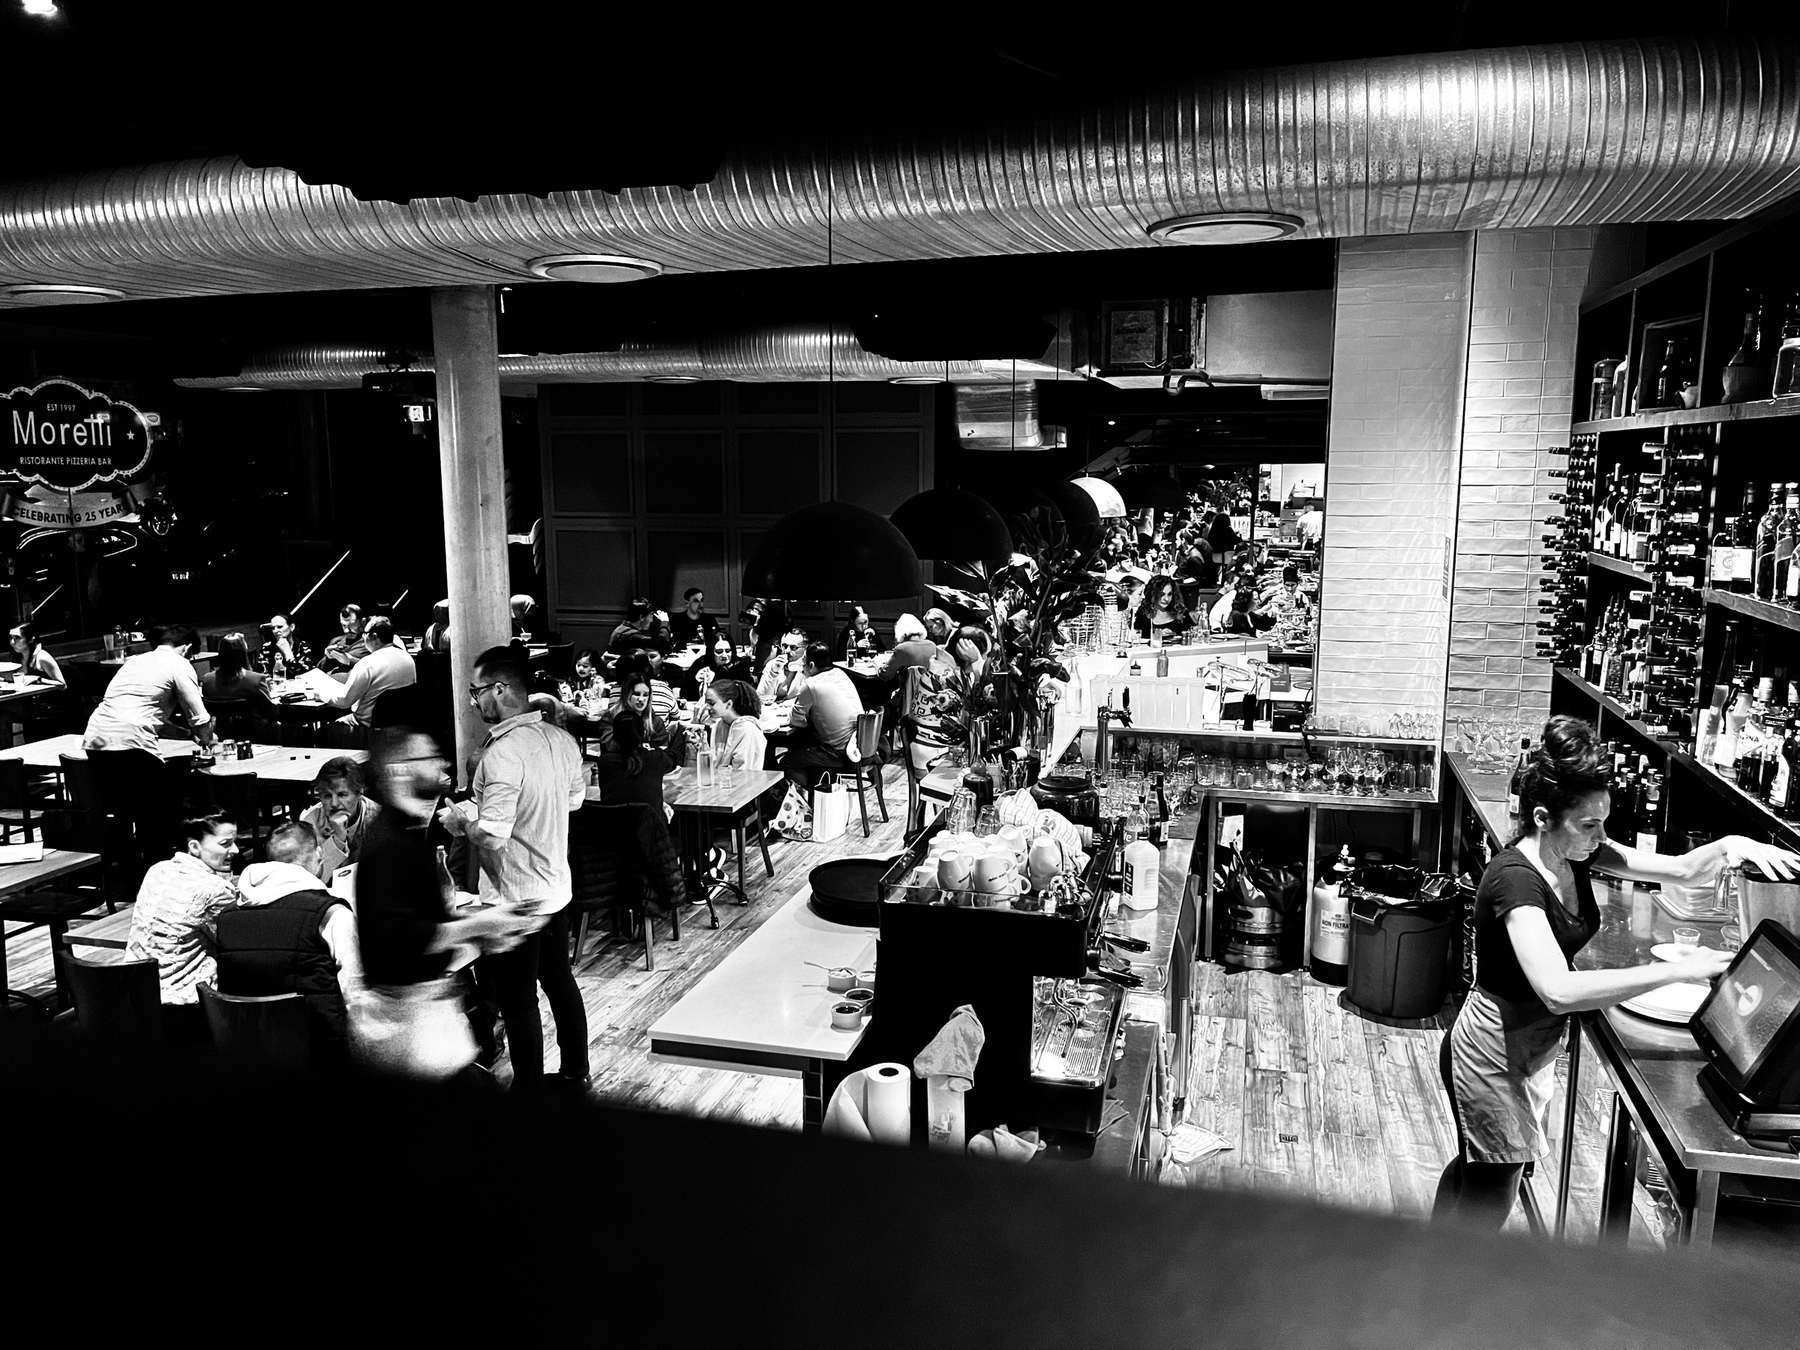 A black-and-white image of a busy restaurant and bar, viewed from the upper level